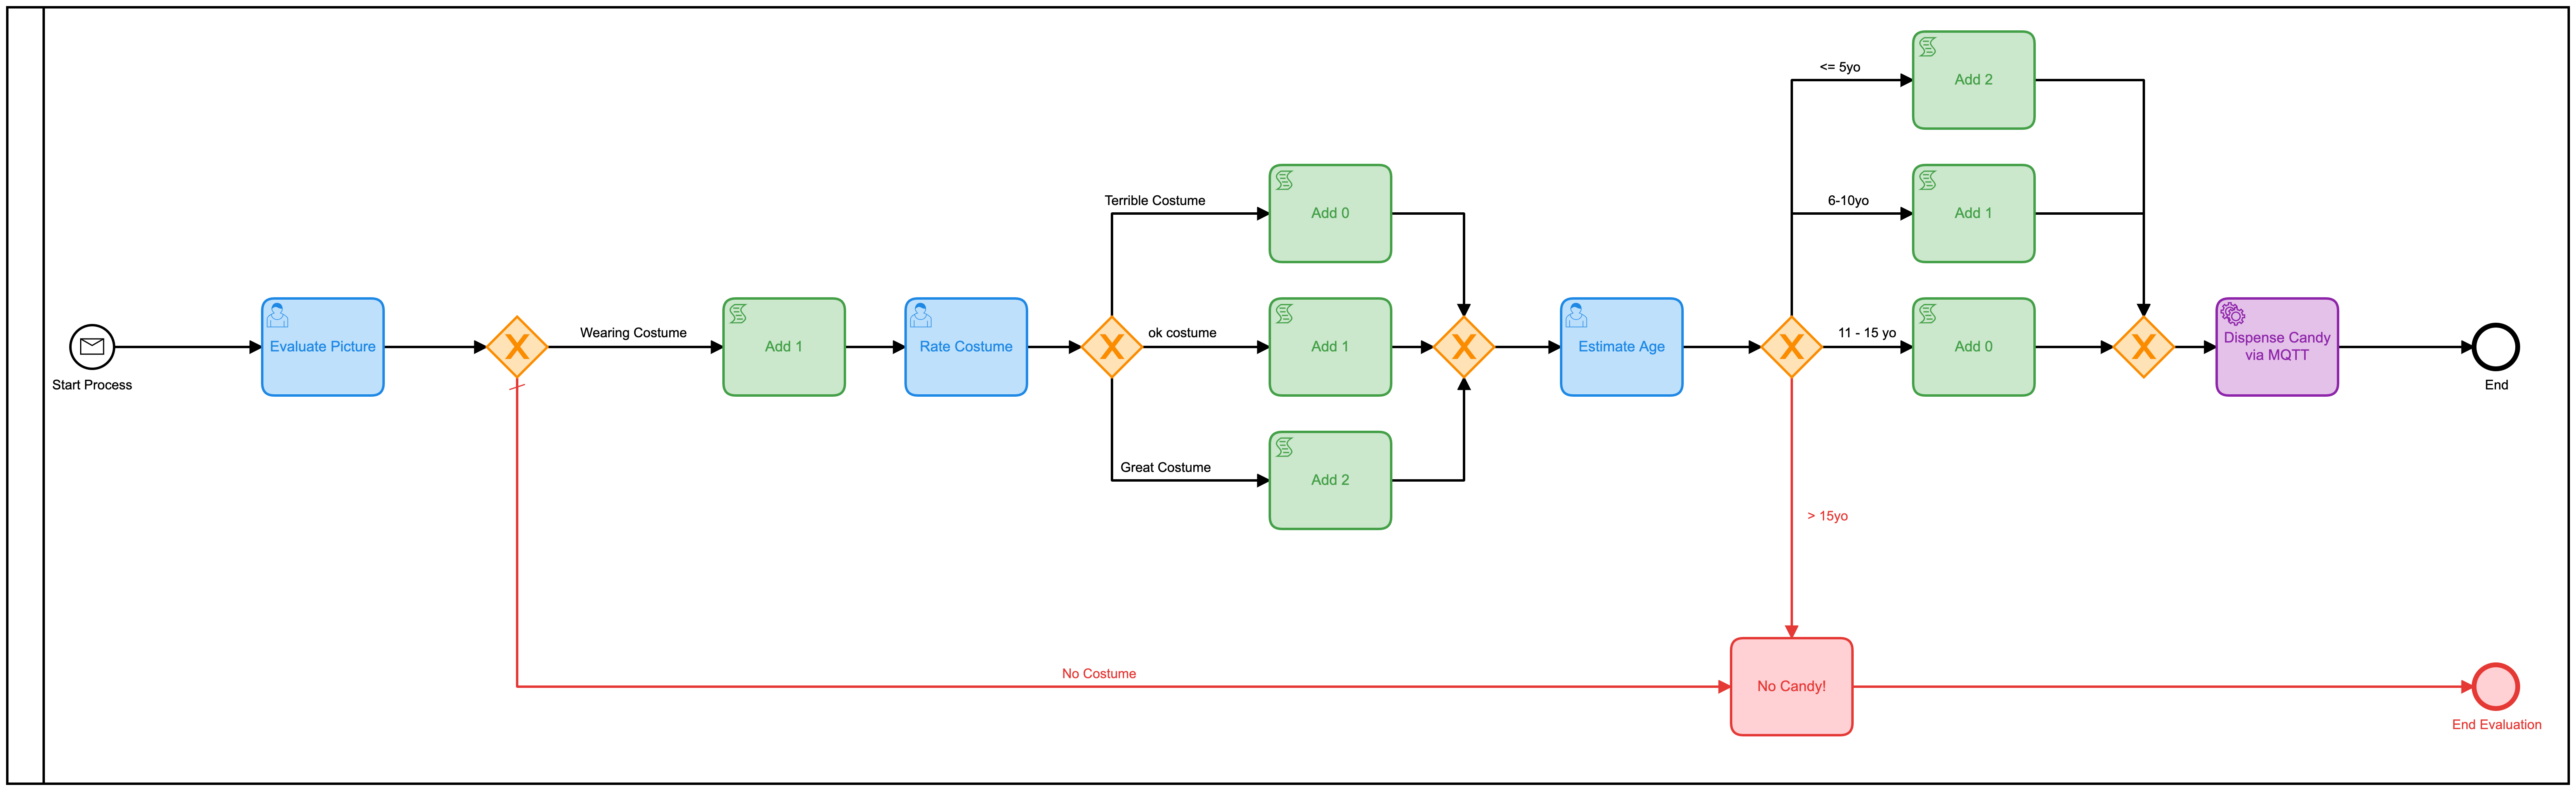 THe same BPMN model, but with all the nodes color-coded